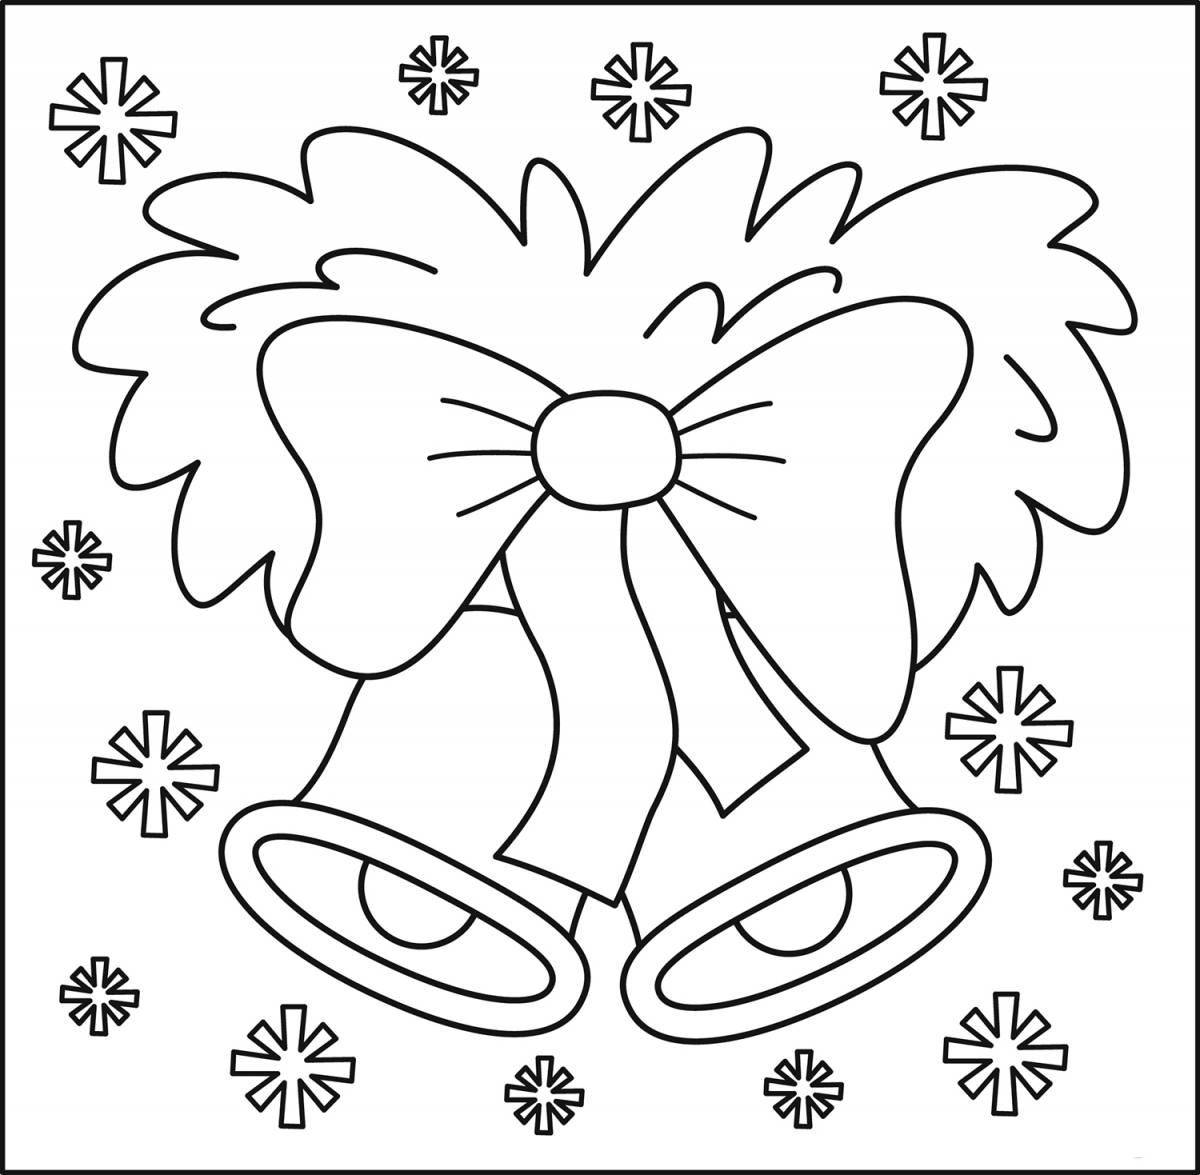 Great jingle bells coloring page